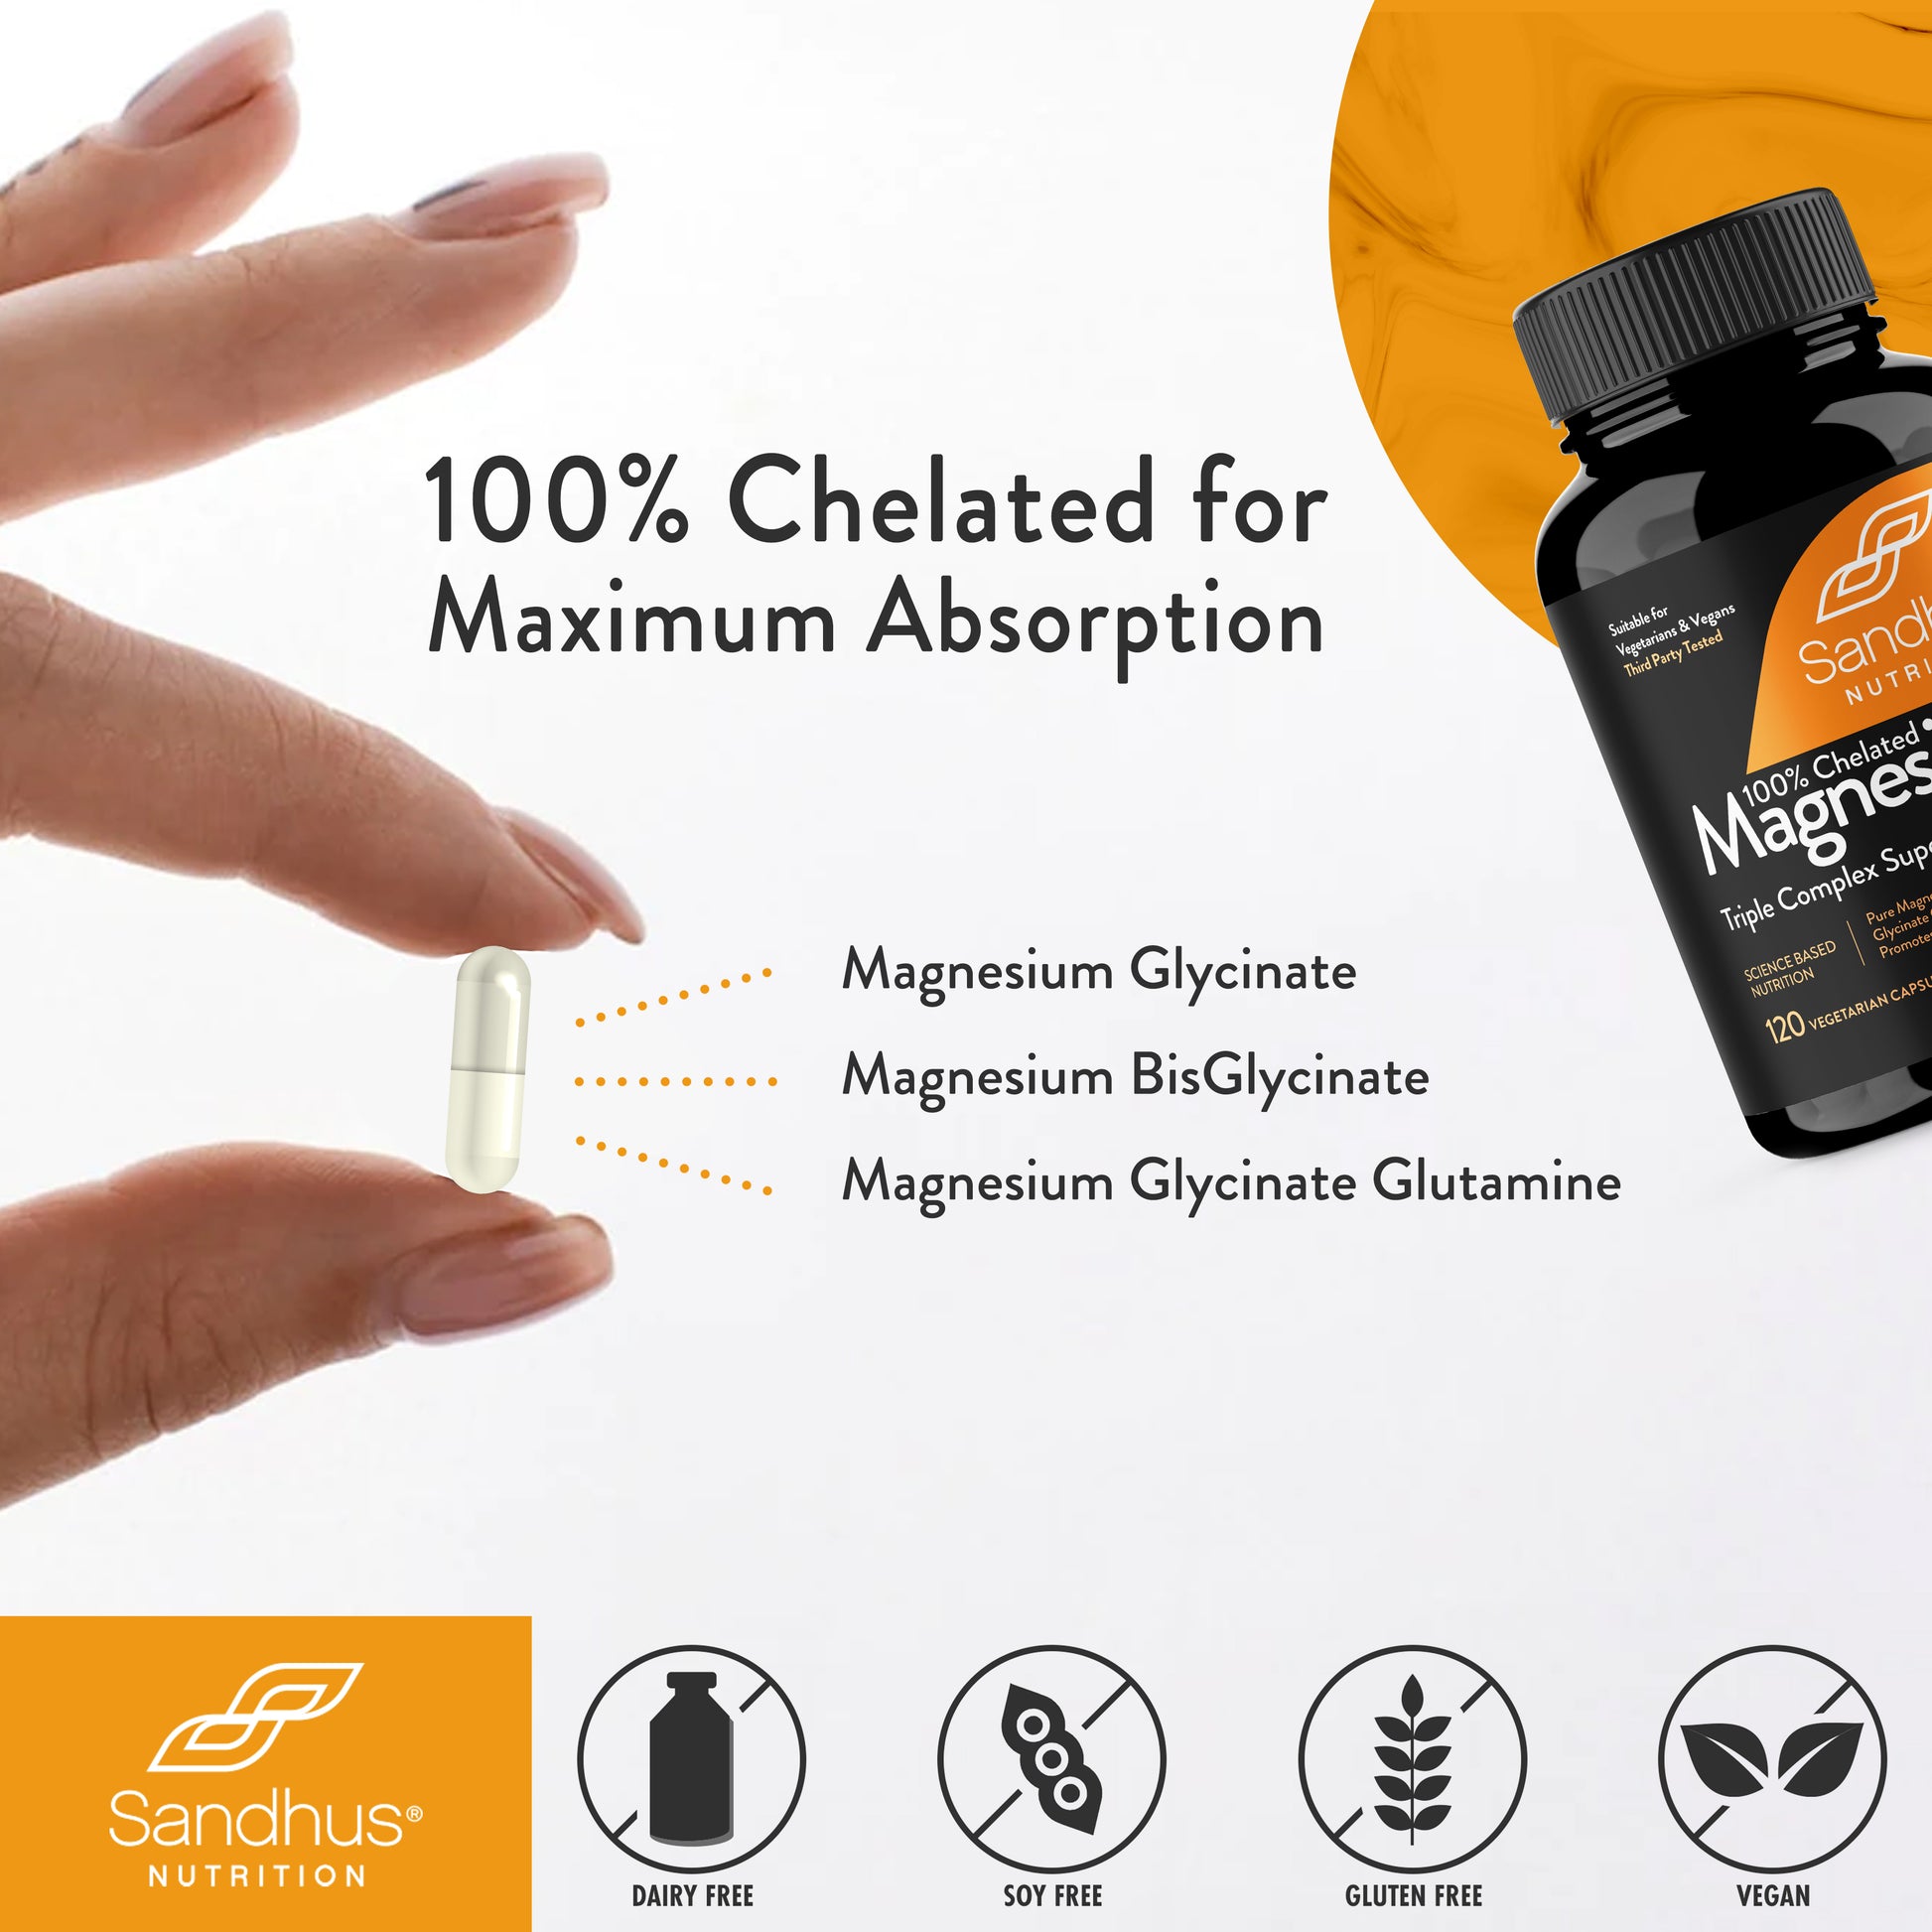 chelated-for-maximum-absorption-magnesium-glycinate